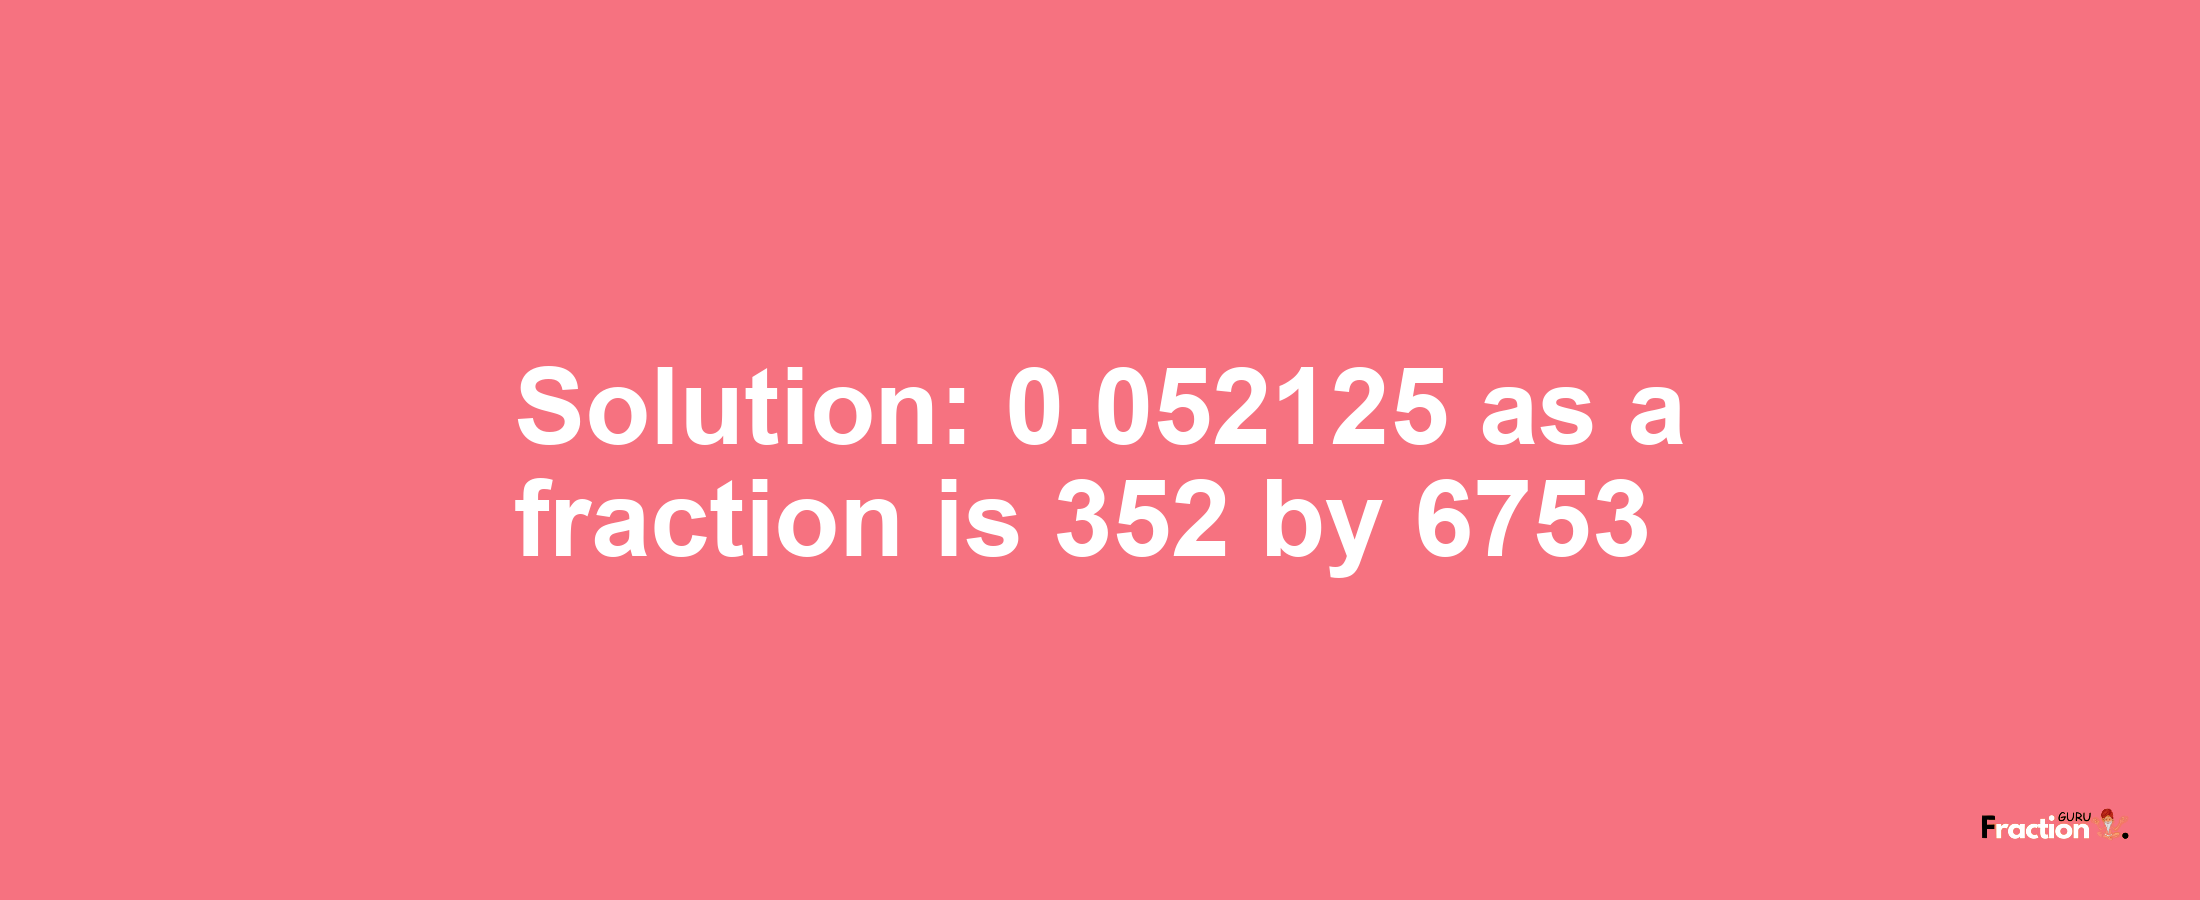 Solution:0.052125 as a fraction is 352/6753